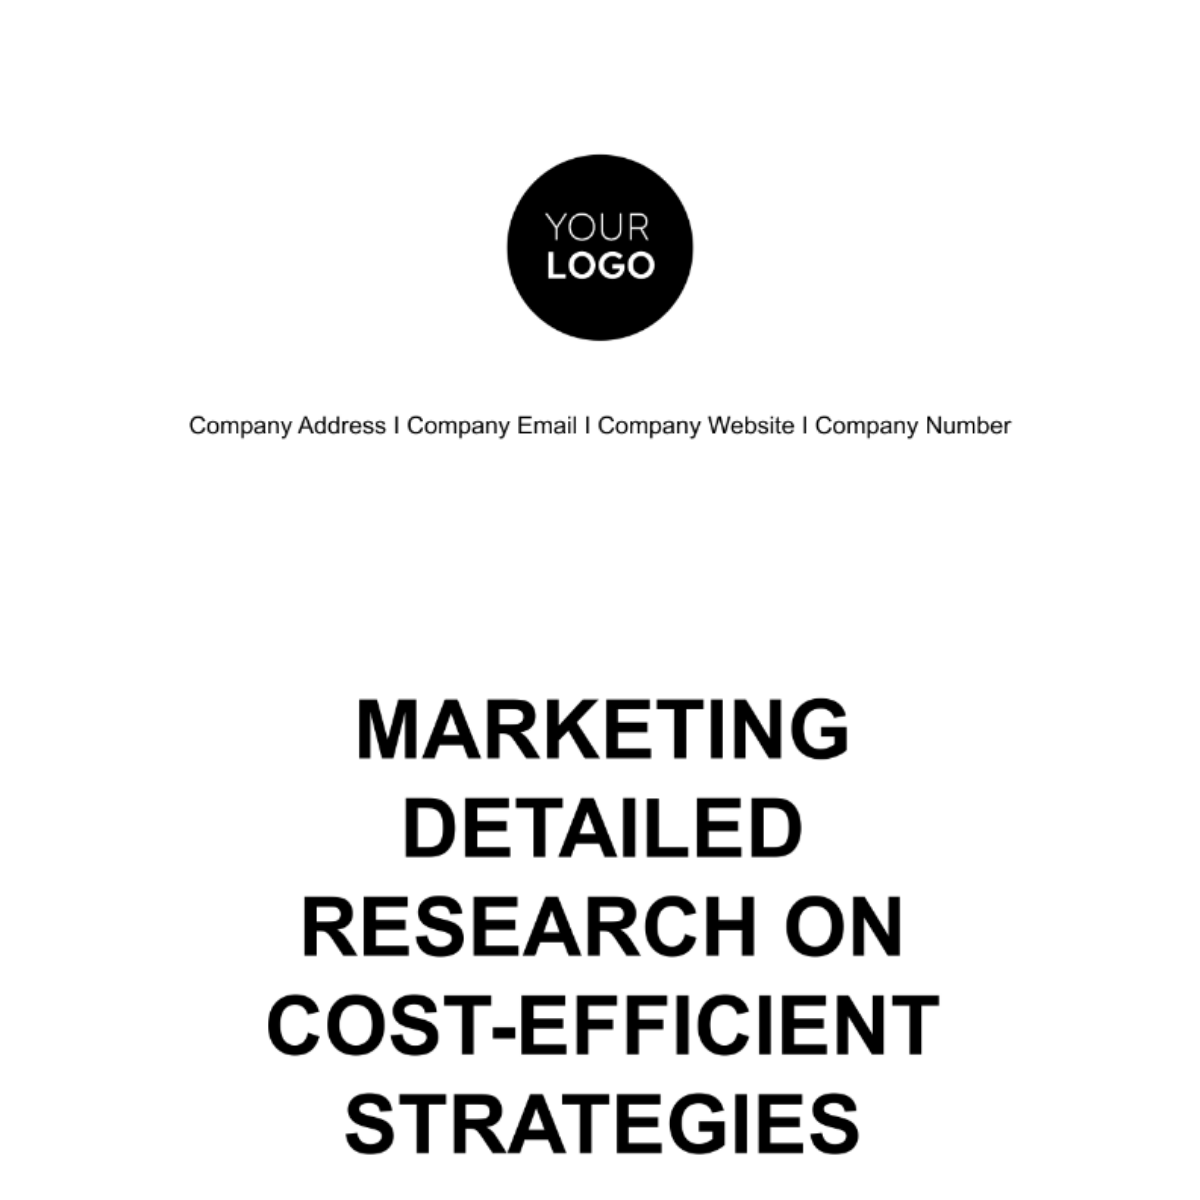 Free Marketing Detailed Research on Cost-Efficient Strategies Template